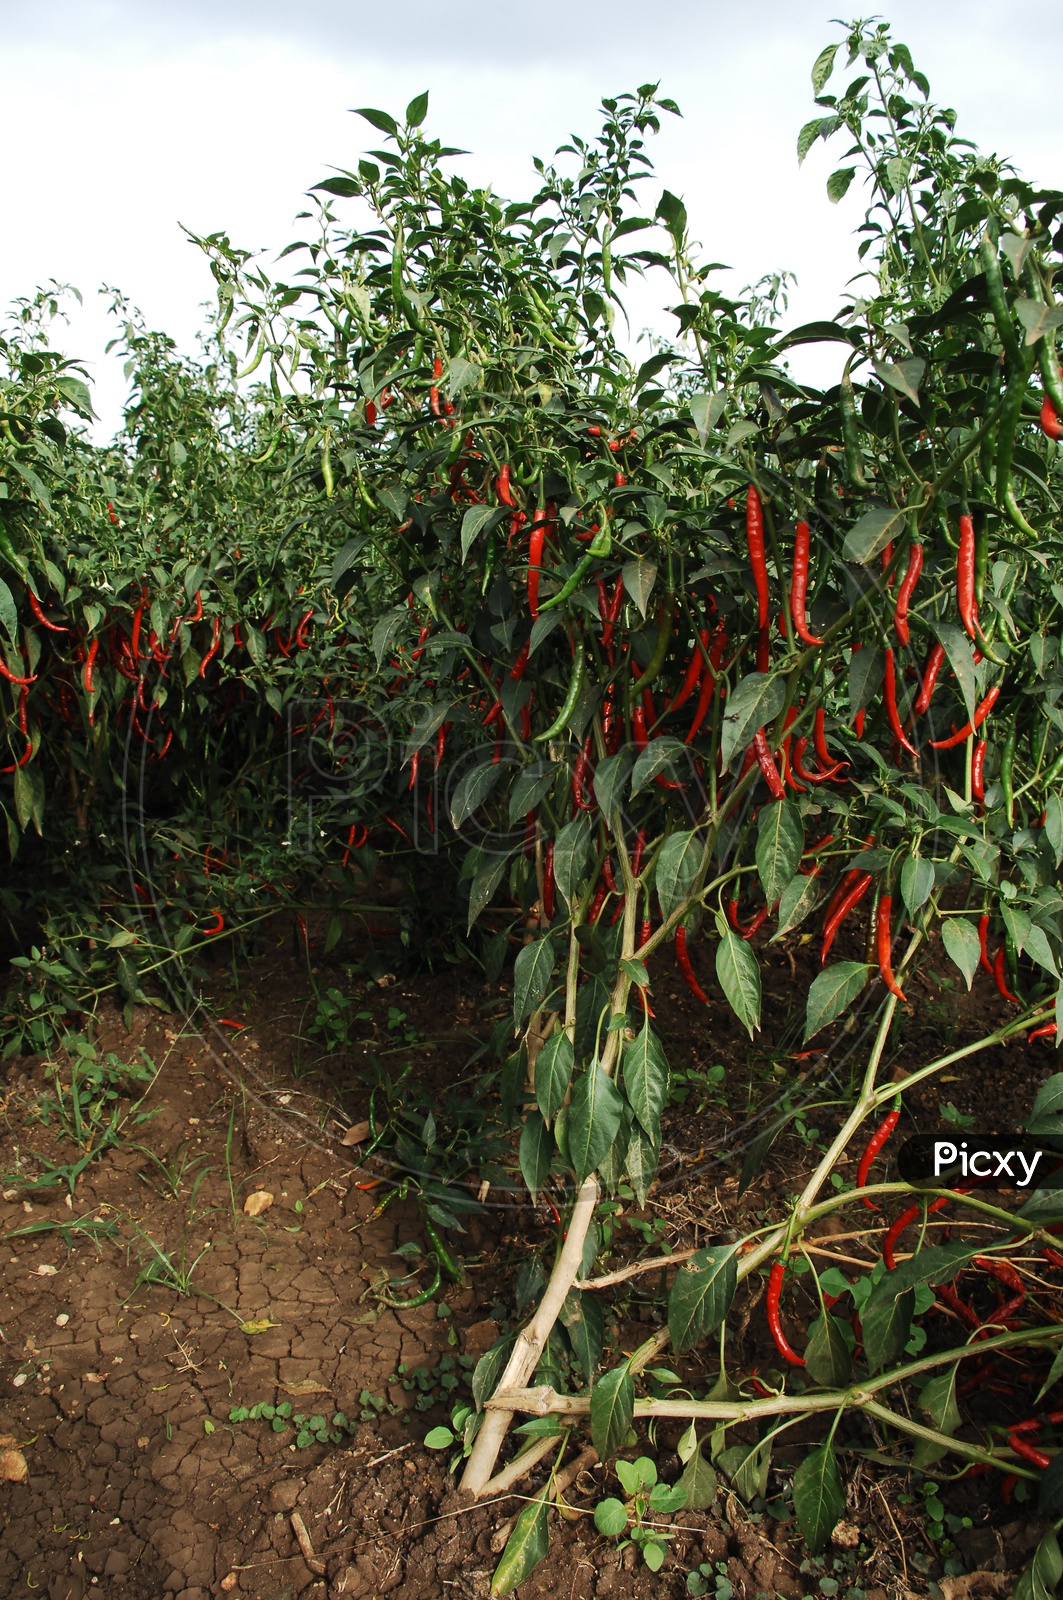 Chillies on The Plants in a Farm Field